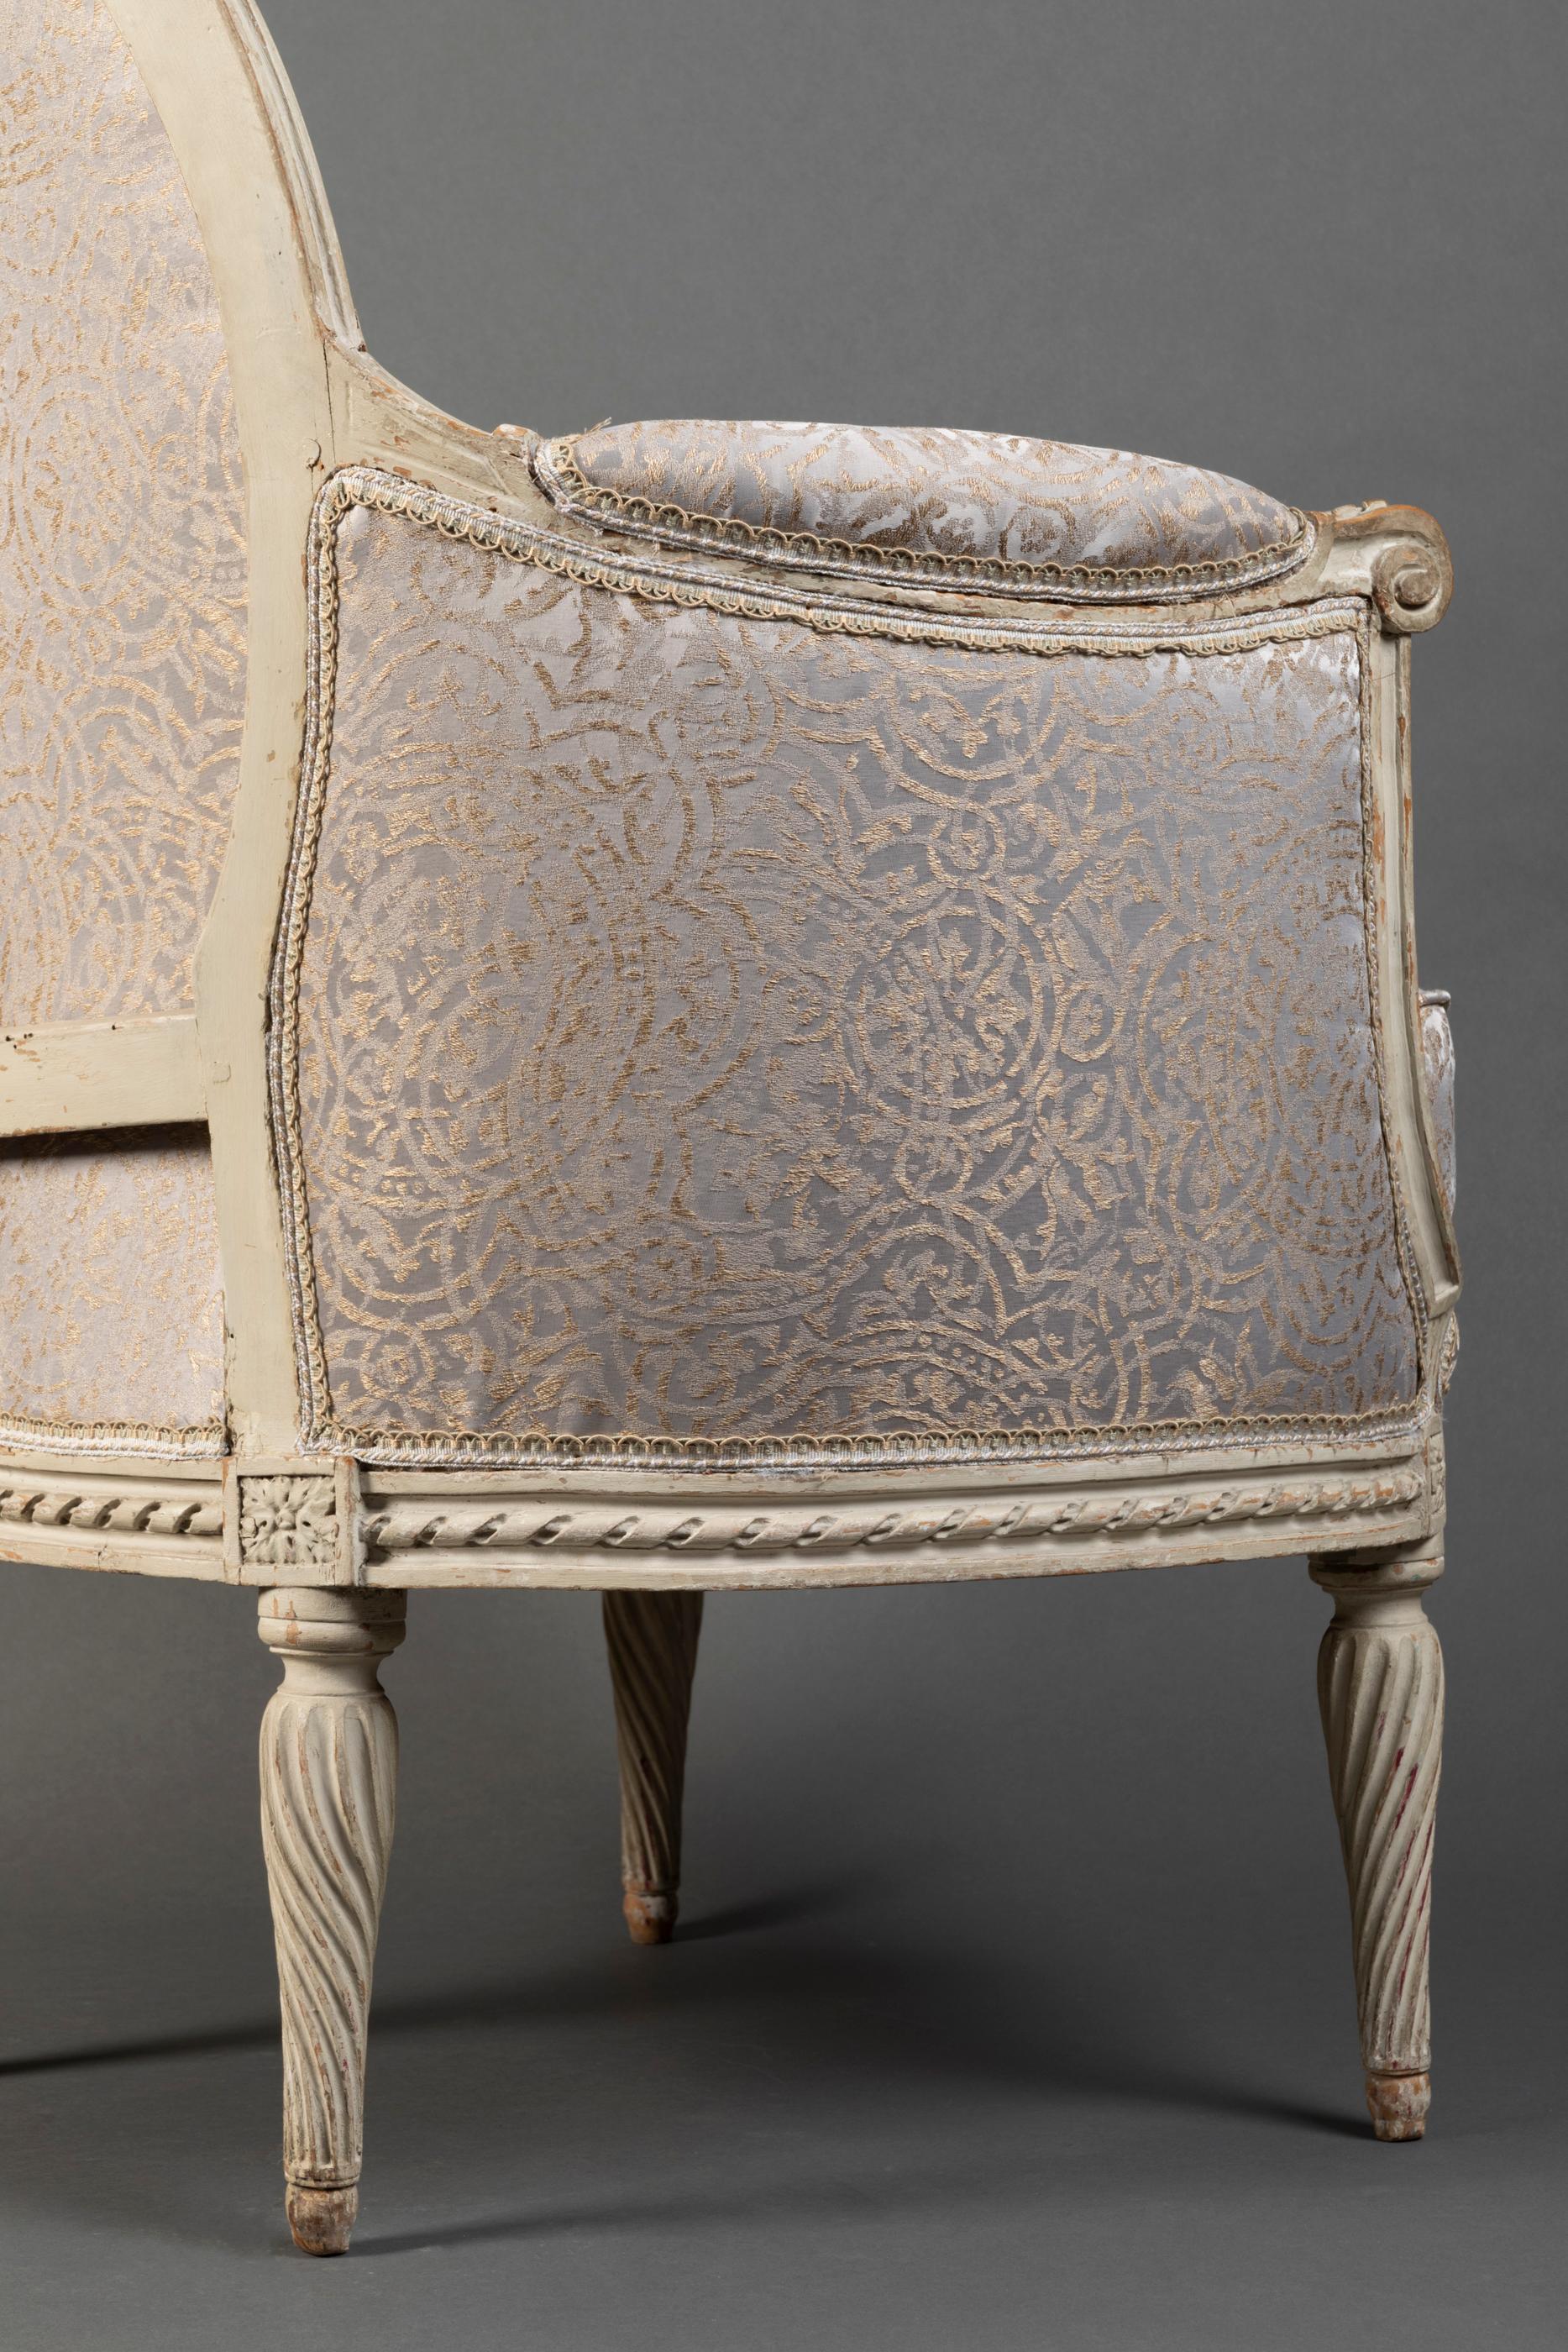 Pair of Bergère Chairs from the Louis XVI Period Stamped, Delanois, 18th Century For Sale 5